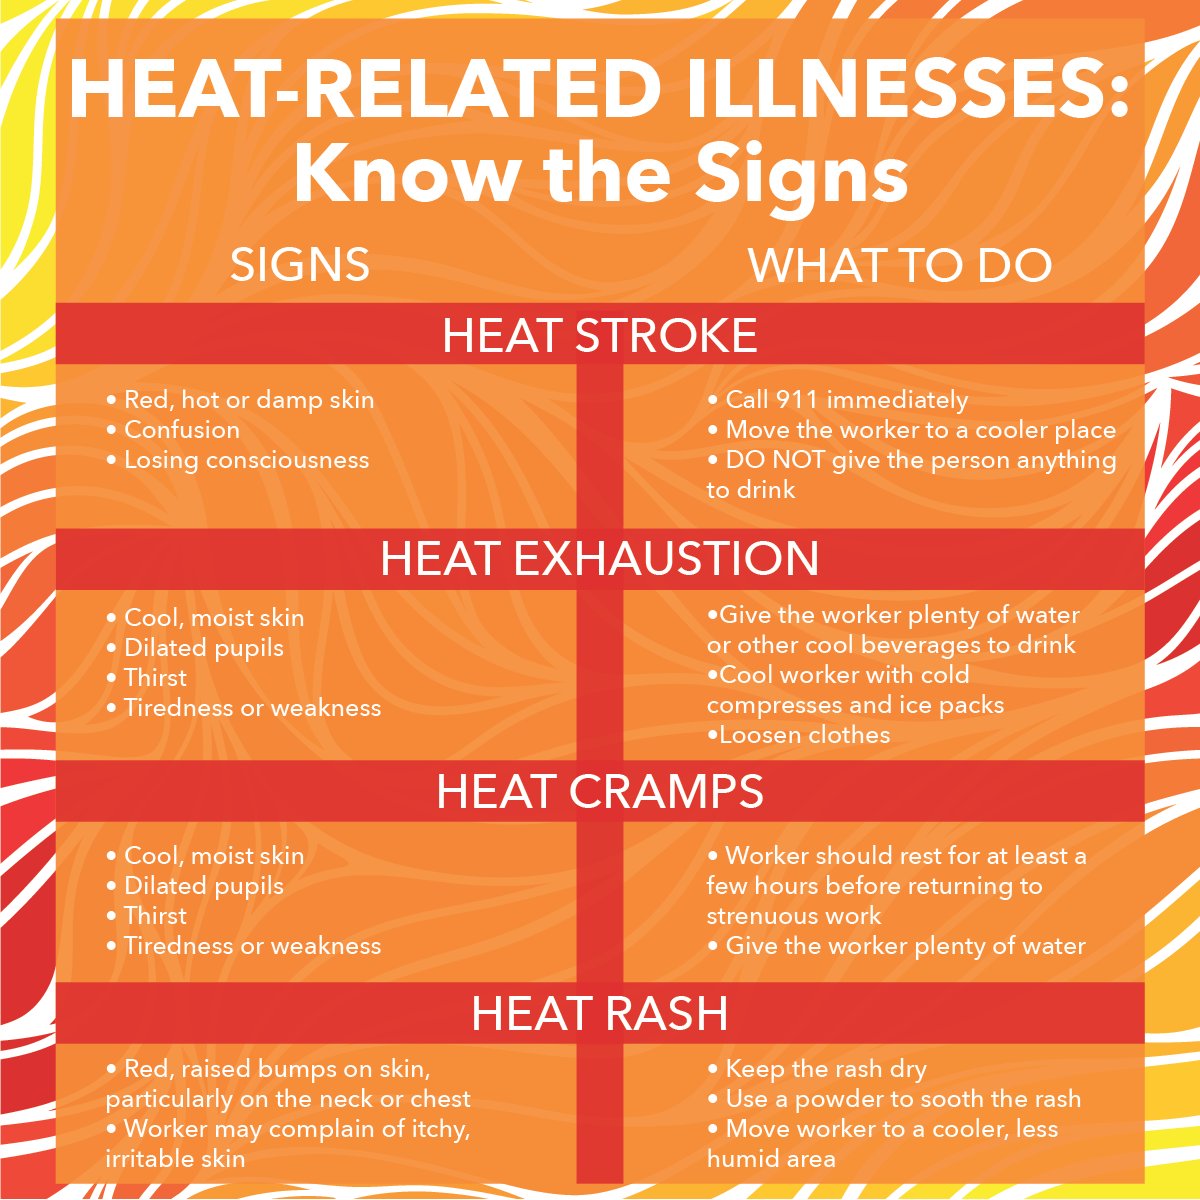 Also, remember that if a person has had a heat injury before, they're more susceptible to them in future. That's heat exhaustion and heat stroke.Know the signs and symptoms, and keep safe out there.